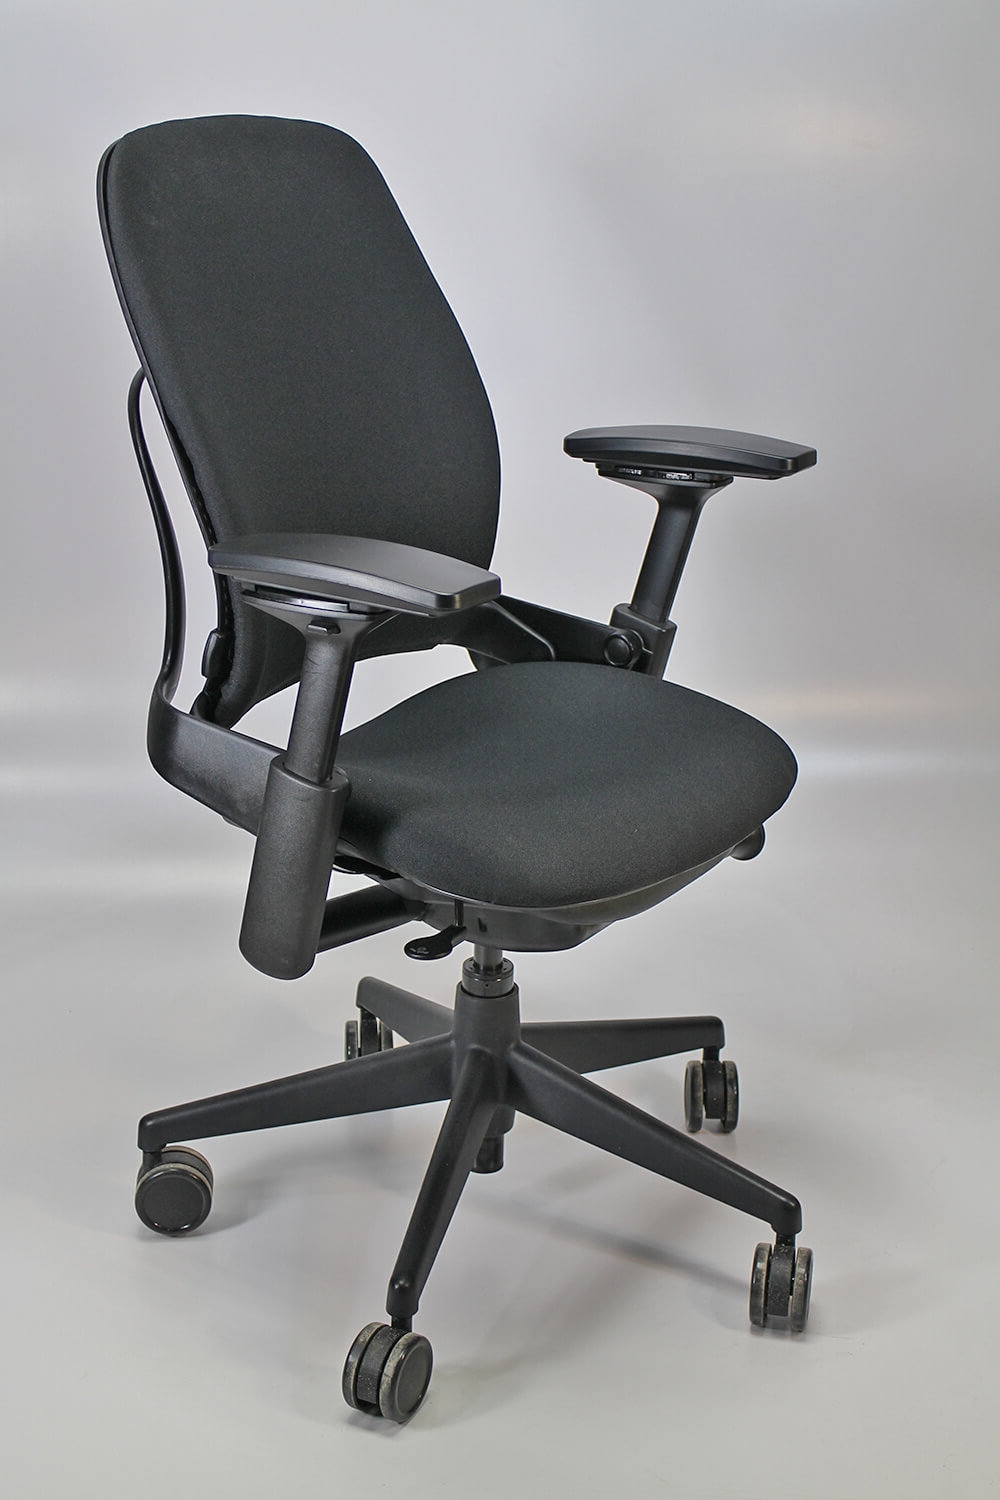 Steelcase Office Chairs - Remanufactured Steelcase Leap Chair Version 2